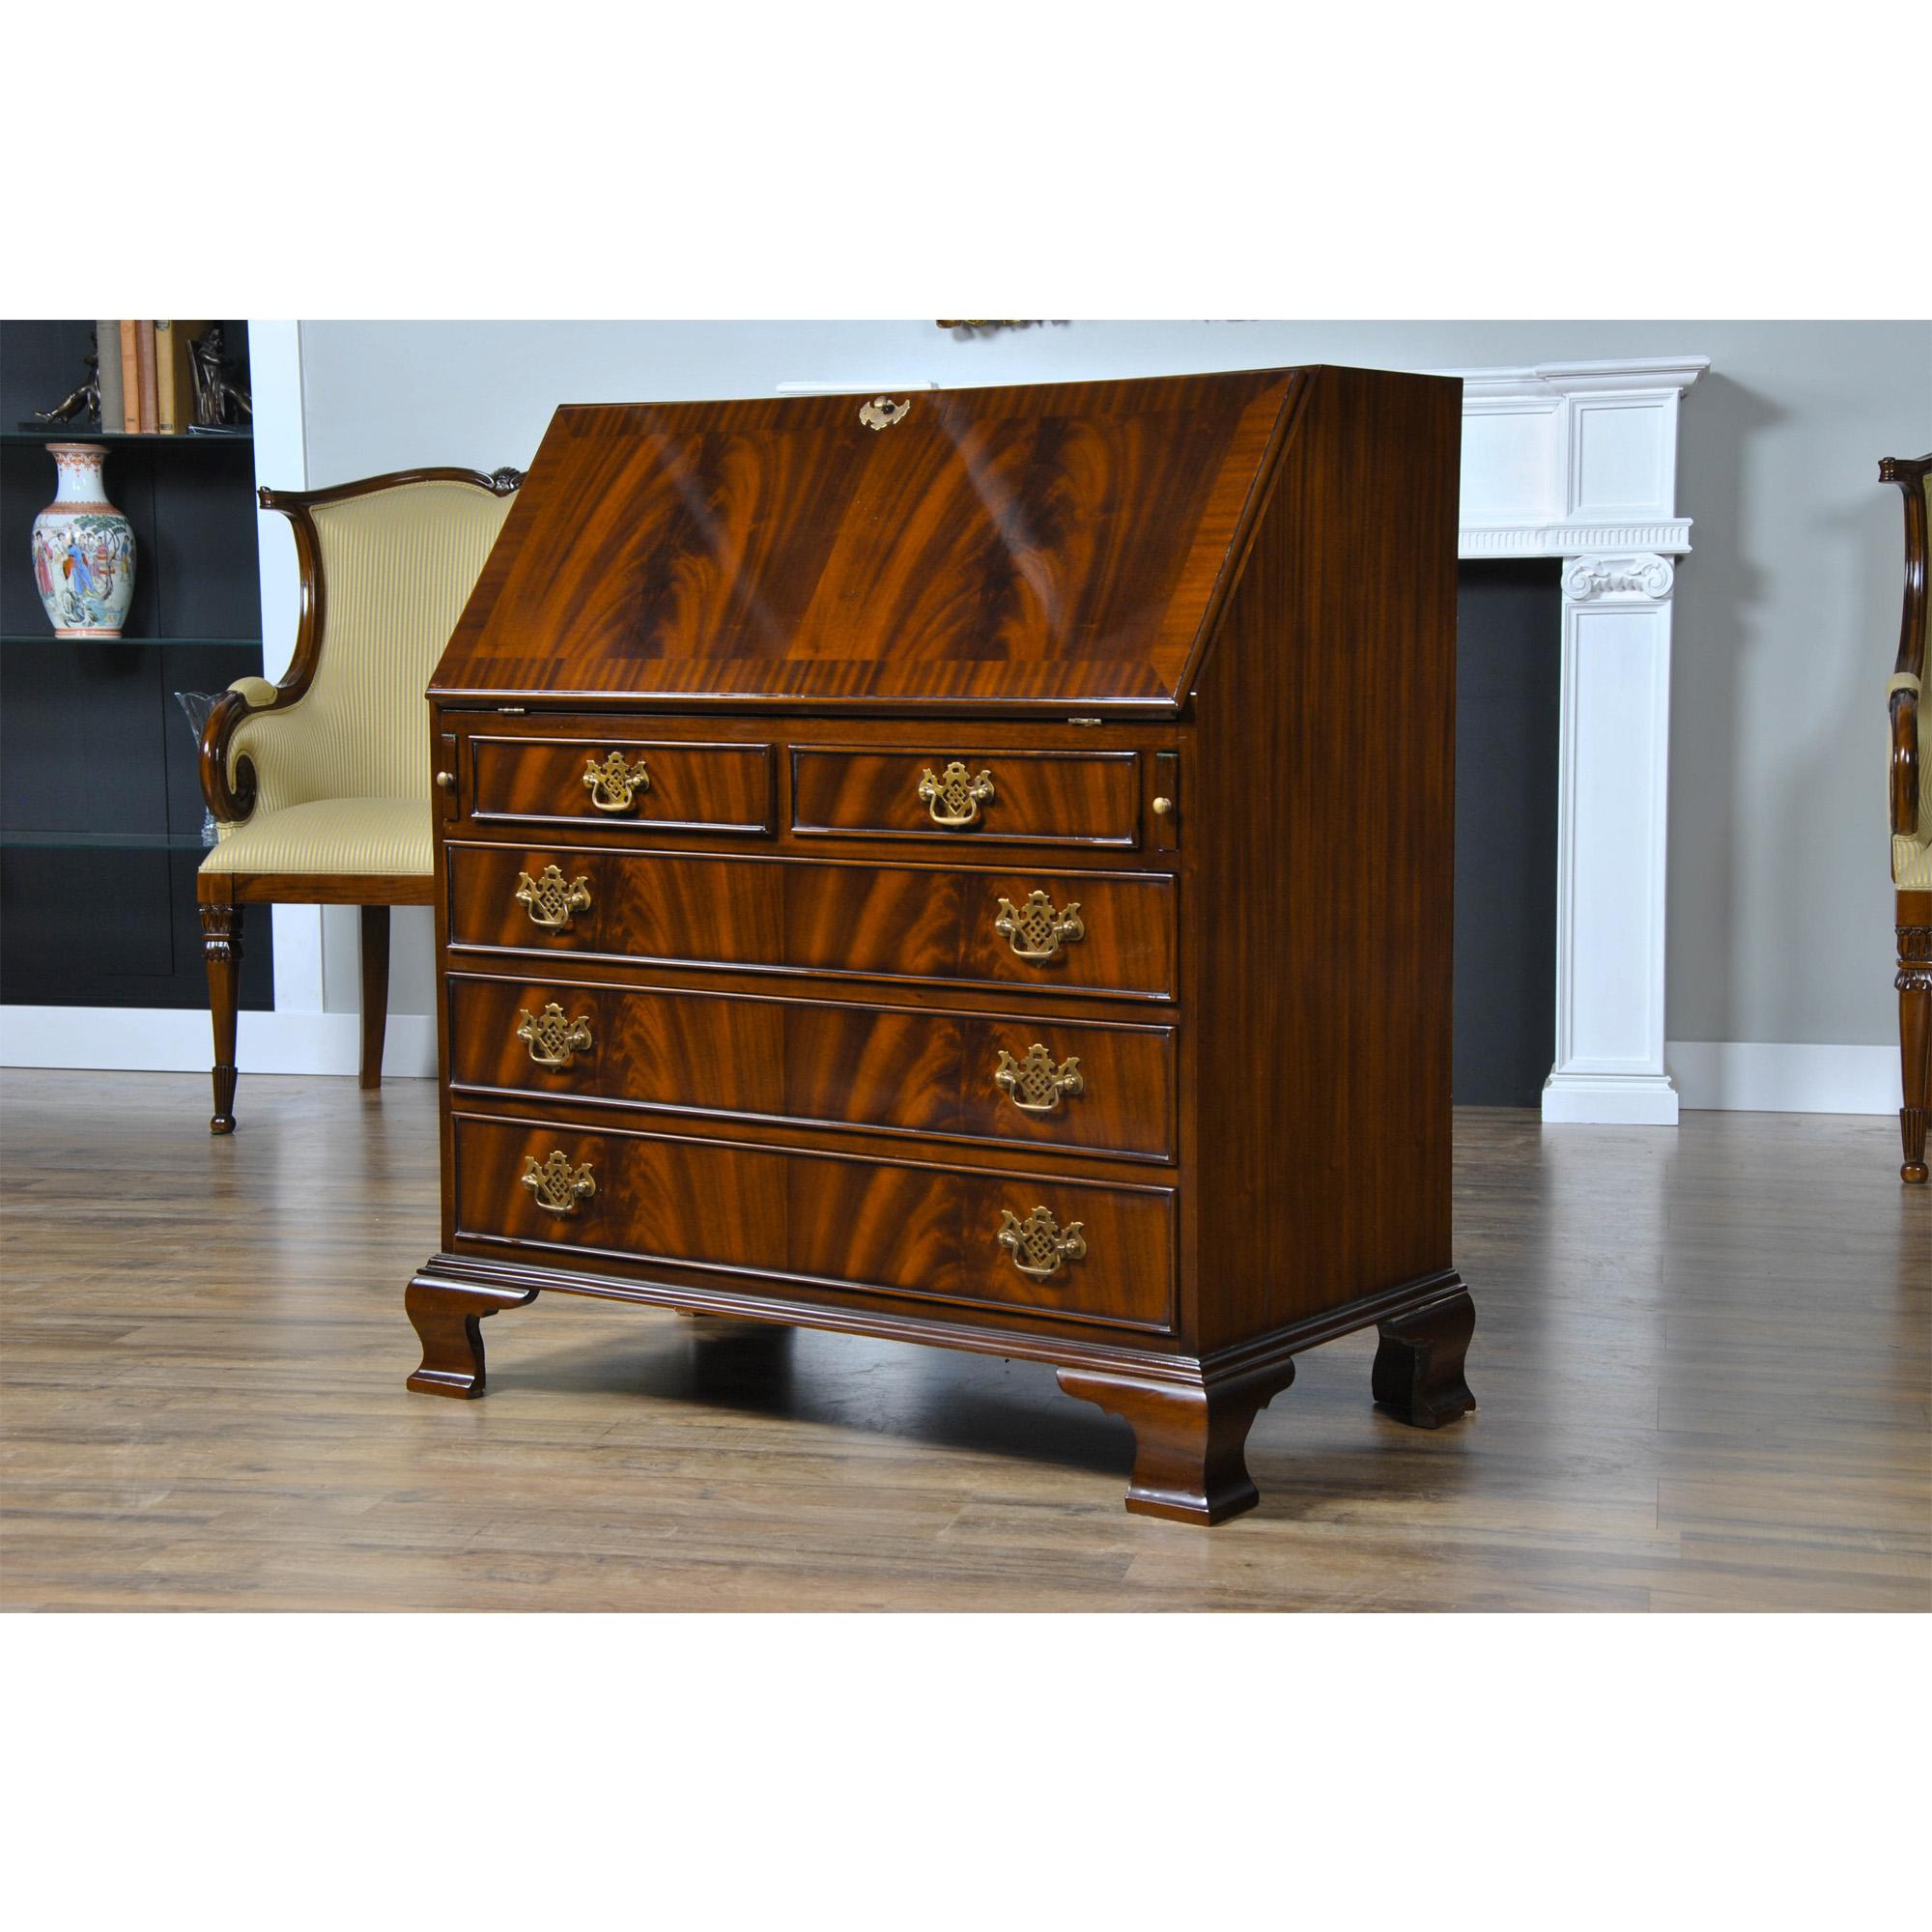 This Mahogany Secretary Desk  from Niagara Furniture has all the outstanding qualities of an antique original. Made of select mahogany solids and mahogany veneers, the desk has four graduated drawers resting over top of shaped, ogee bracket feet.